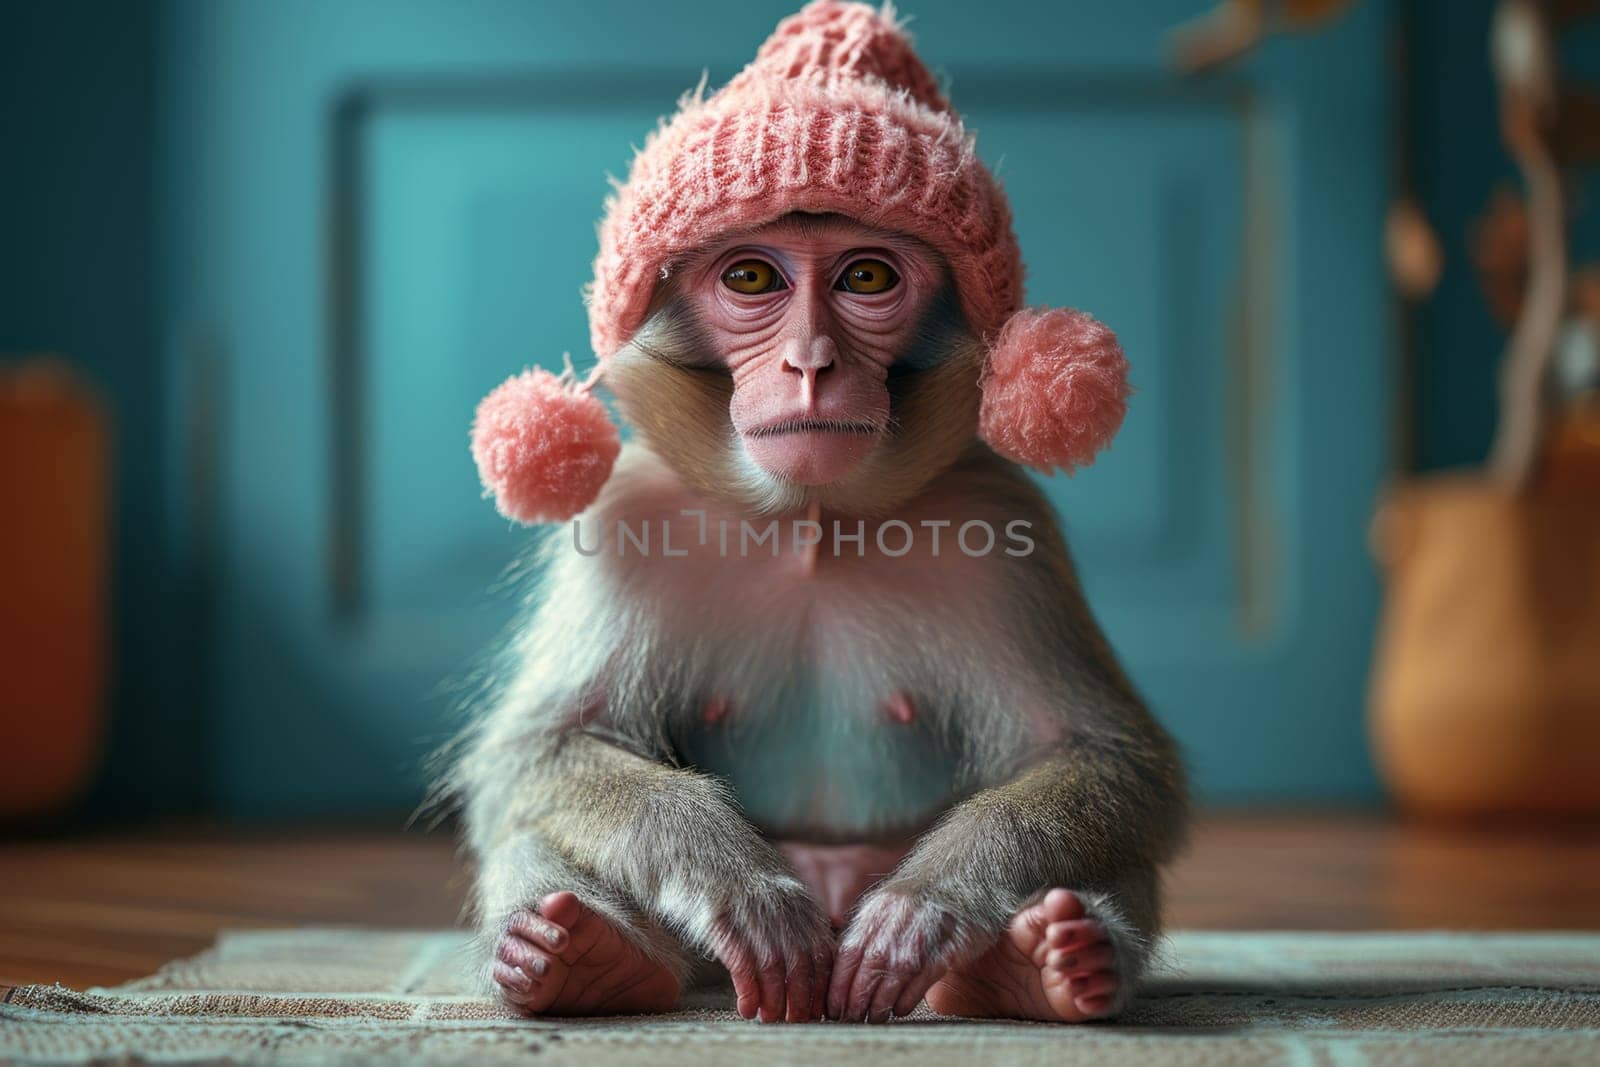 A pink monkey in a warm hat sitting in a blue interior by Lobachad